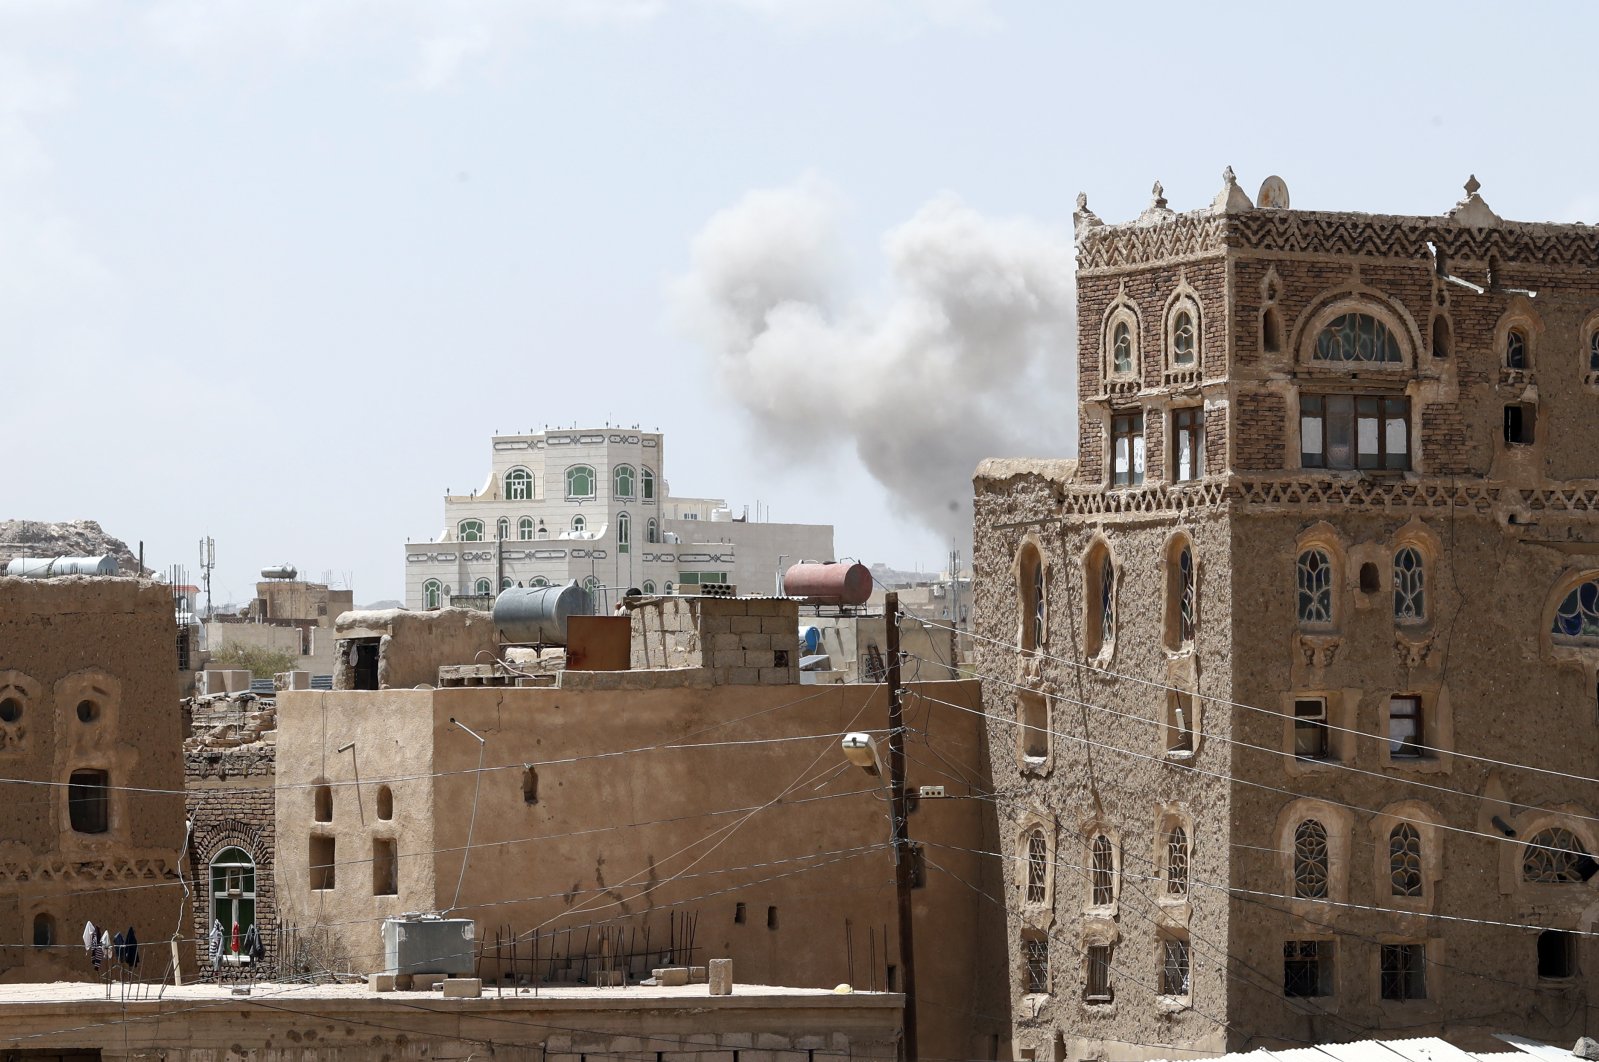 Smoke billows above a neighborhood following Saudi-led airstrikes targeting a Houthi-held position, a day after the Houthis fired ballistic missiles at the Saudi capital Riyadh, Sanaa, Yemen, March 30, 2020. (EPA Photo)